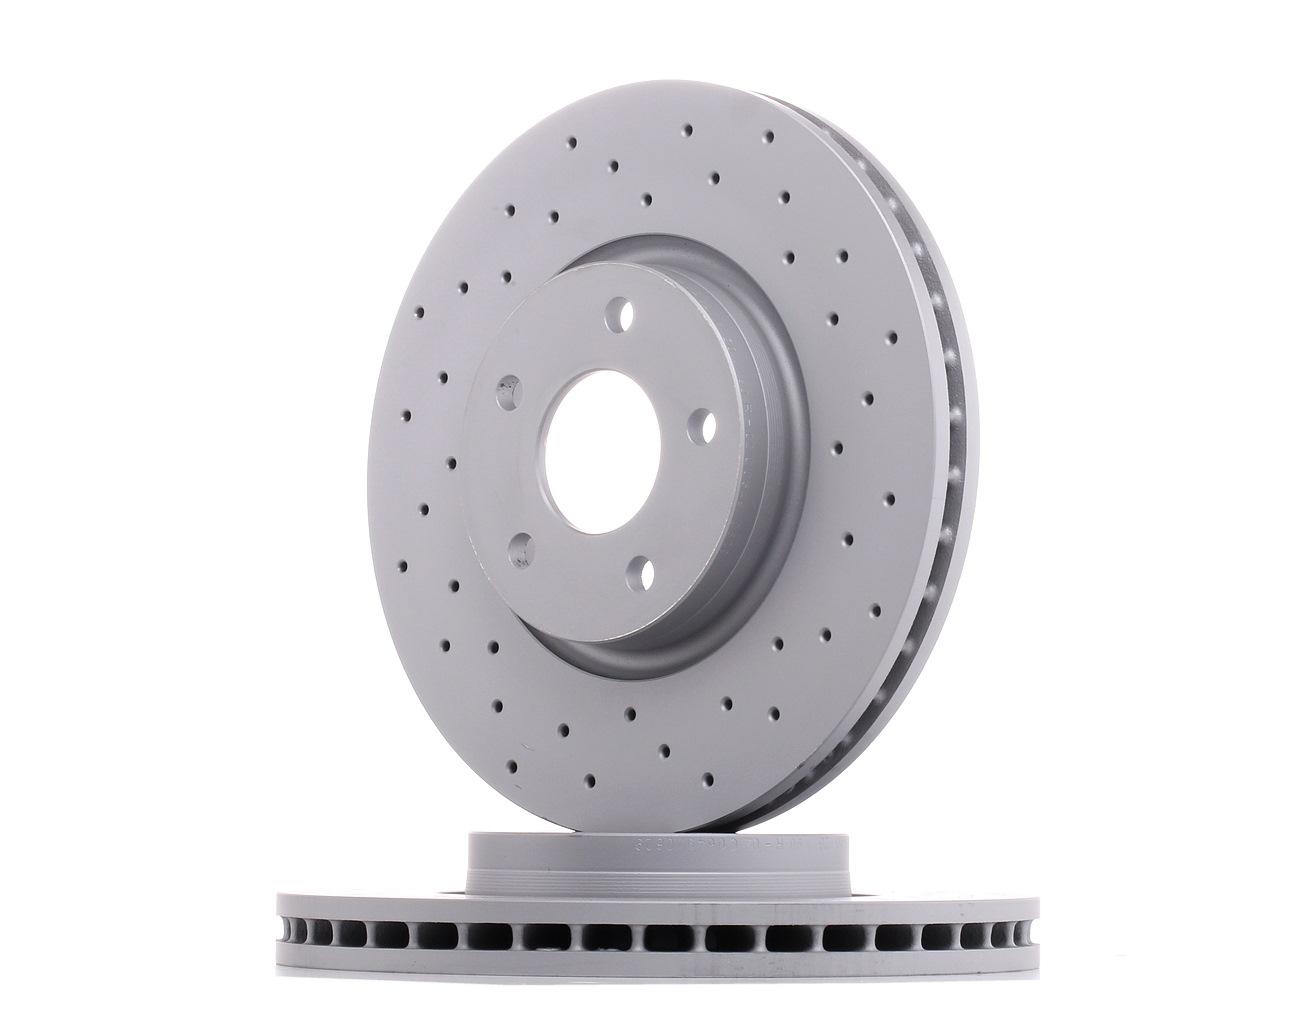 ZIMMERMANN SPORT COAT Z 250.1365.52 Brake disc 300x28mm, 5/5, 5x108, internally vented, Perforated, Coated, High-carbon